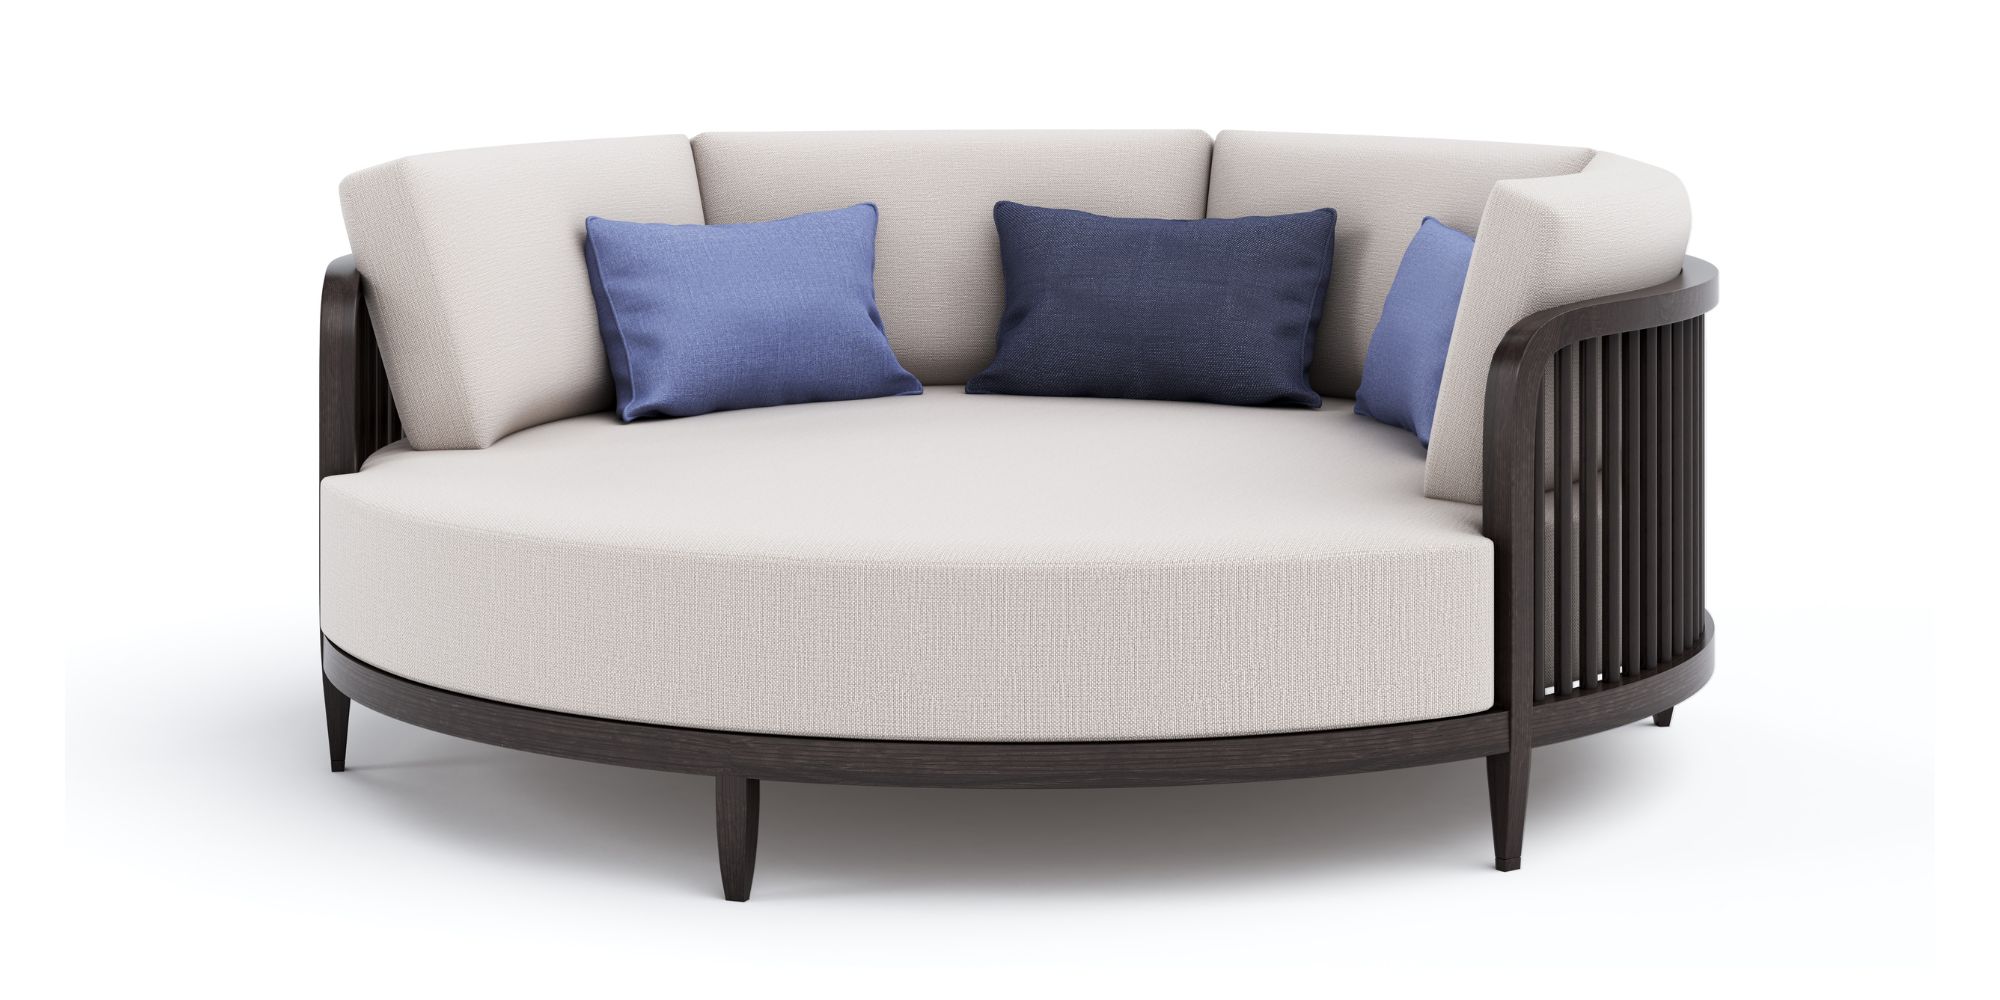 Chuchumber 2 Seater Sofa in Outdoor Sofas for Chuchumber collection